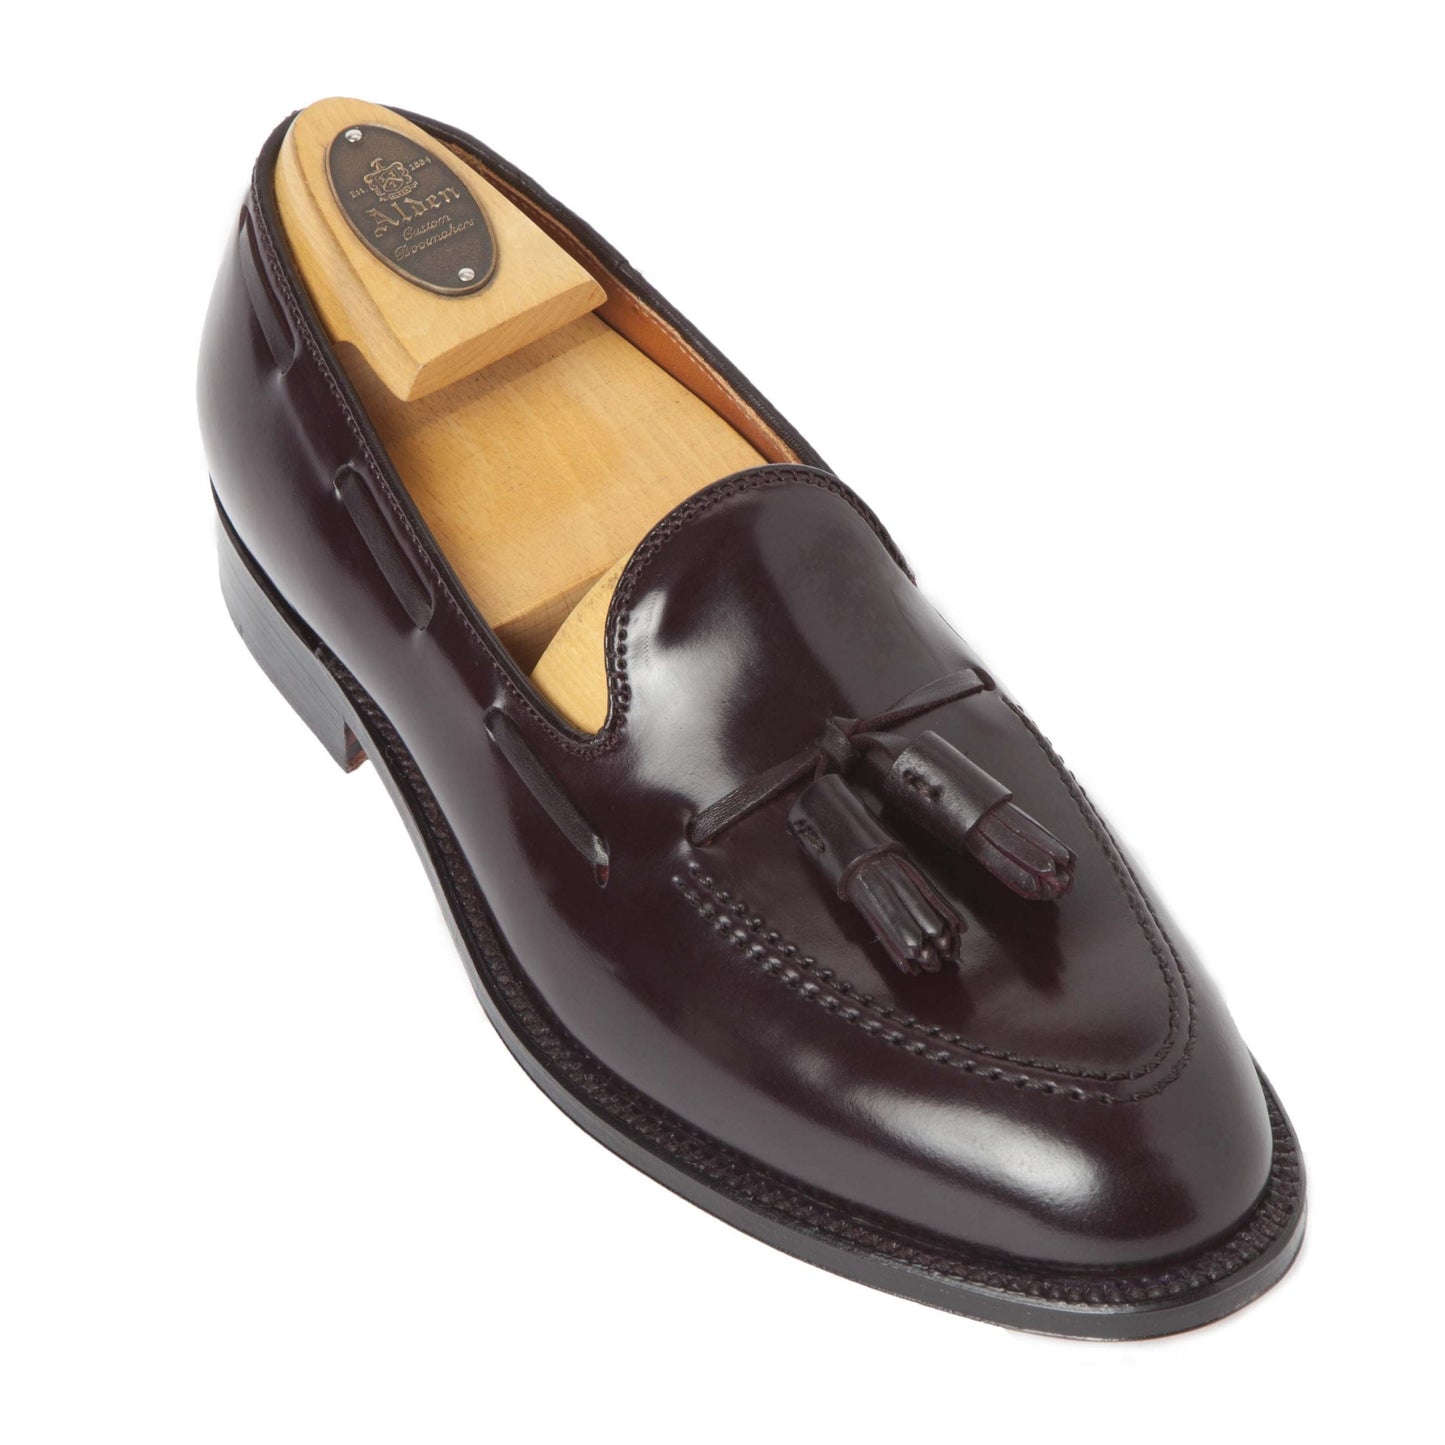 563 - Tassel Loafer in Color 8 Shell Cordovan